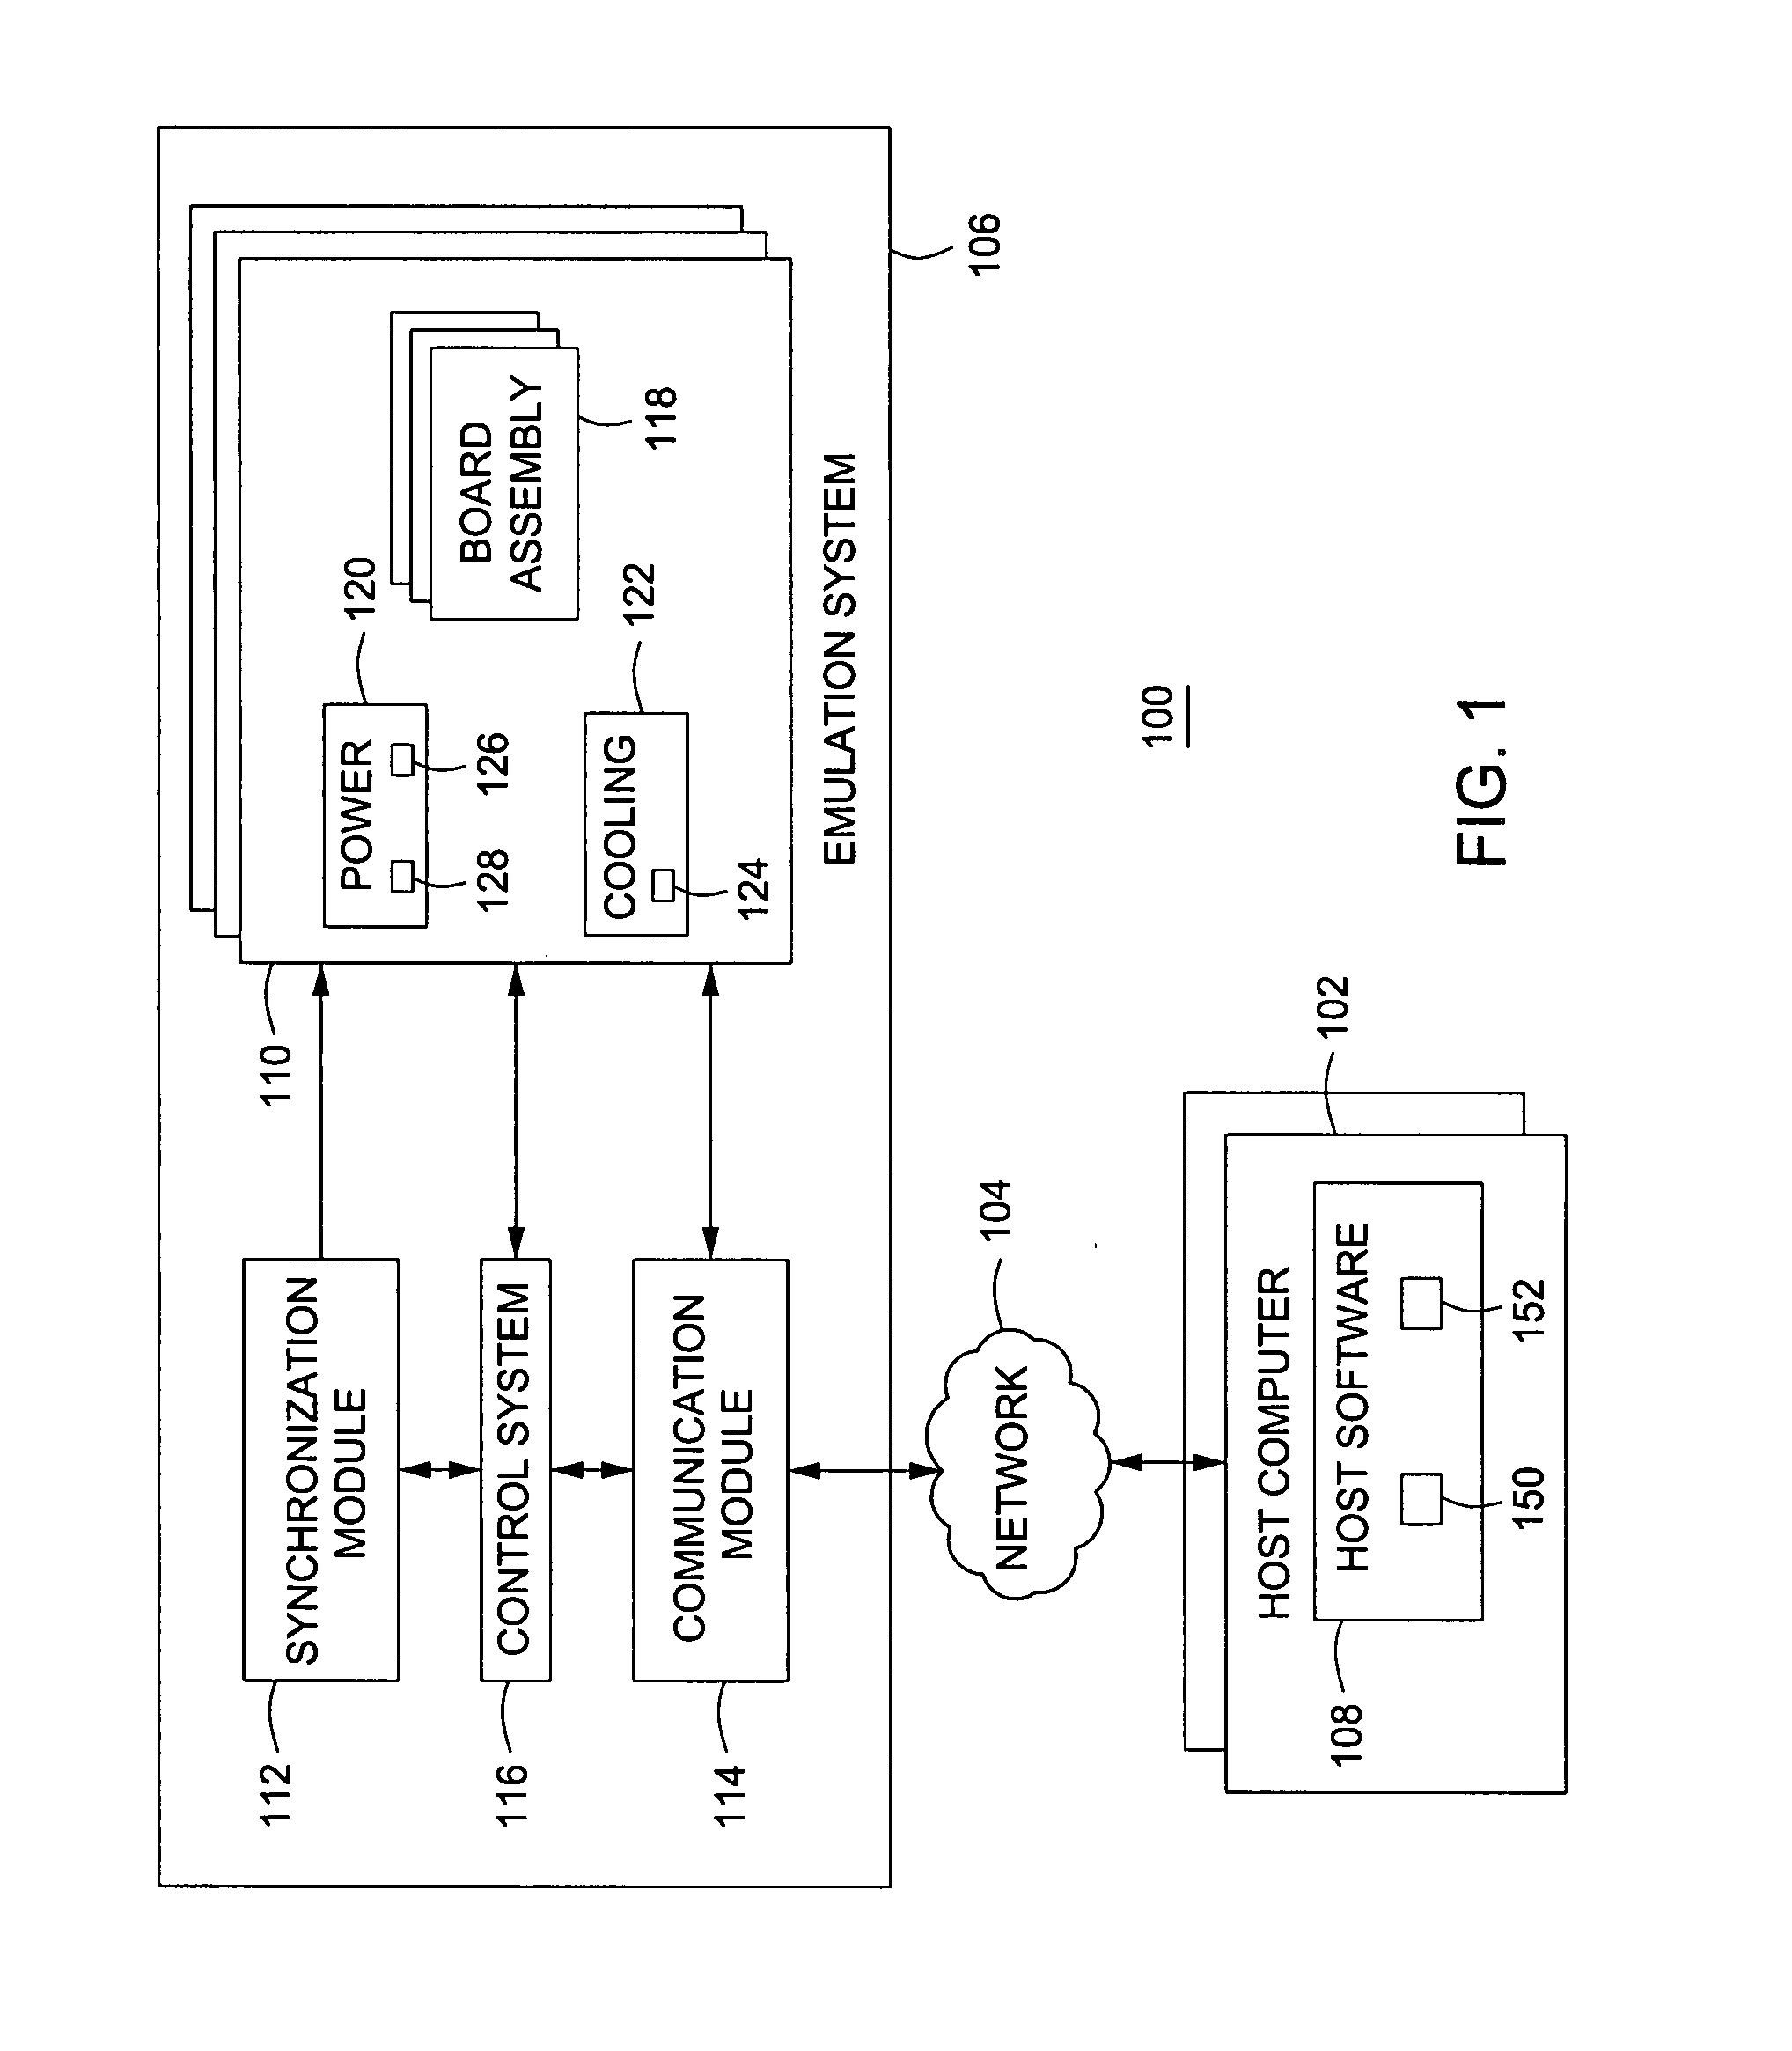 Method and apparatus for controlling power in an emulation system